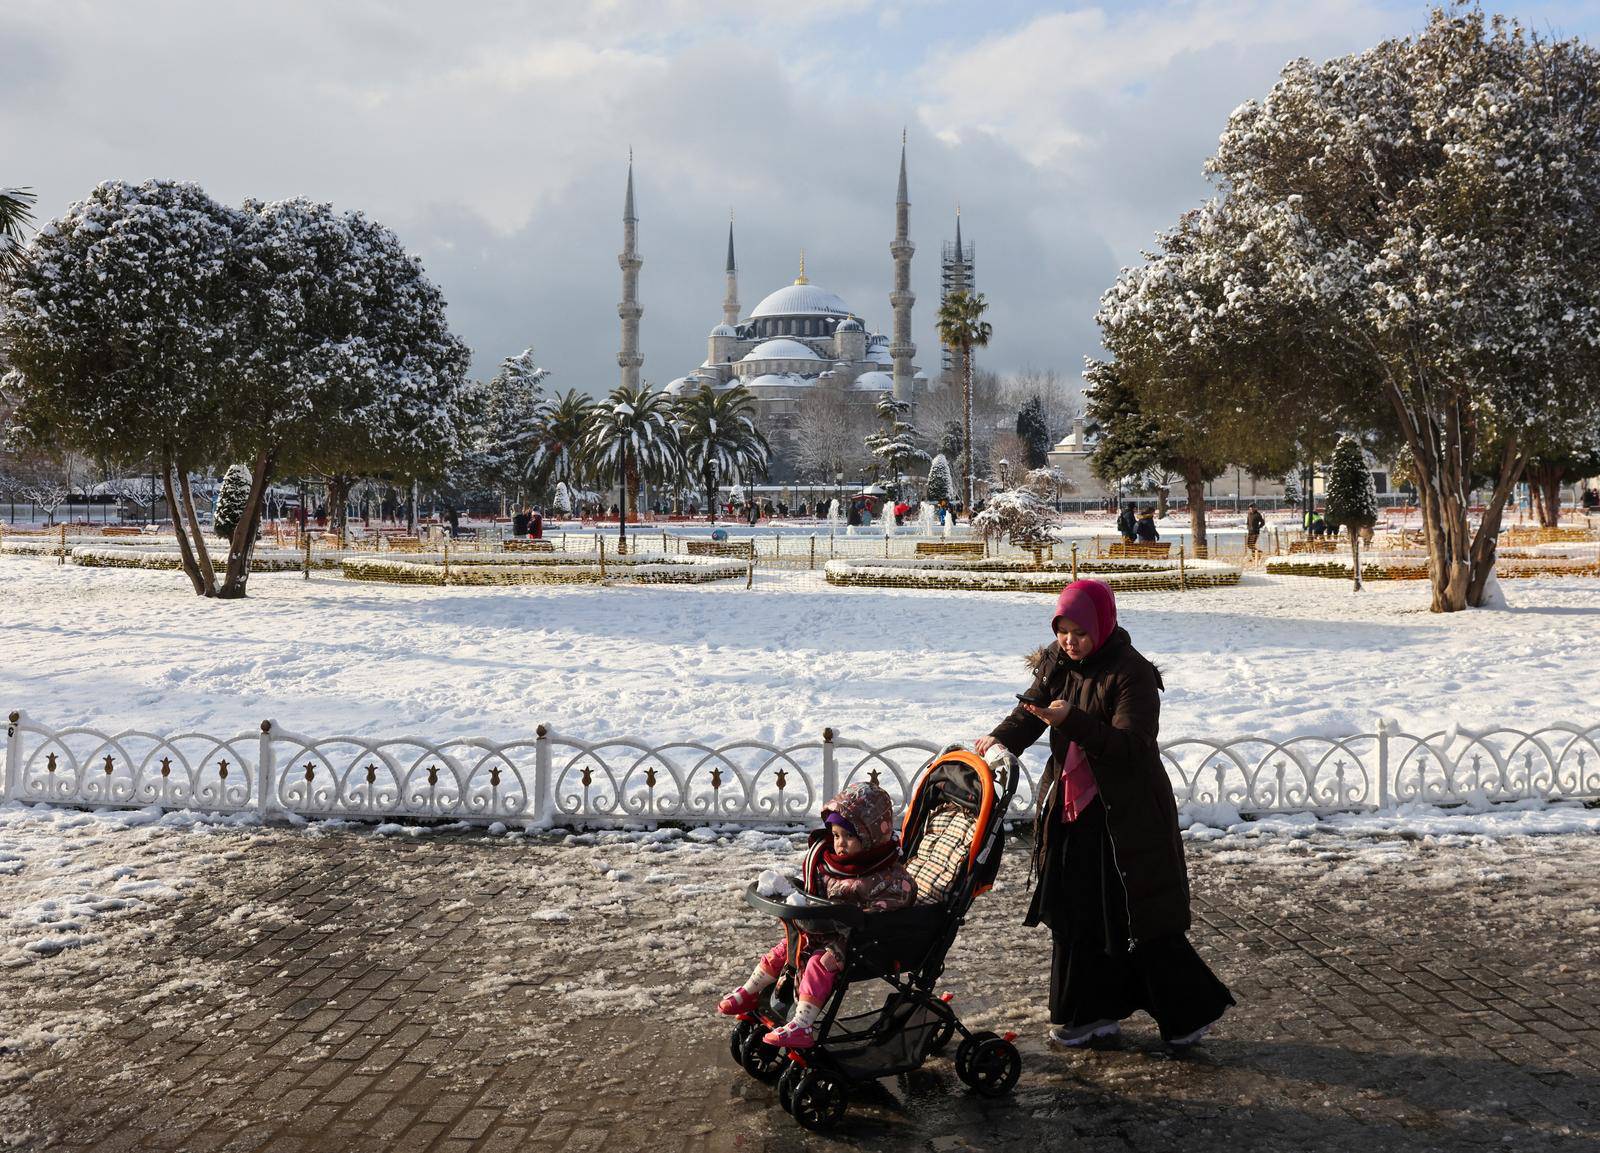 A tourist walks along Sultanahmet Square as Sultan Ahmet Mosque is seen in the background during a snowy day in Istanbul